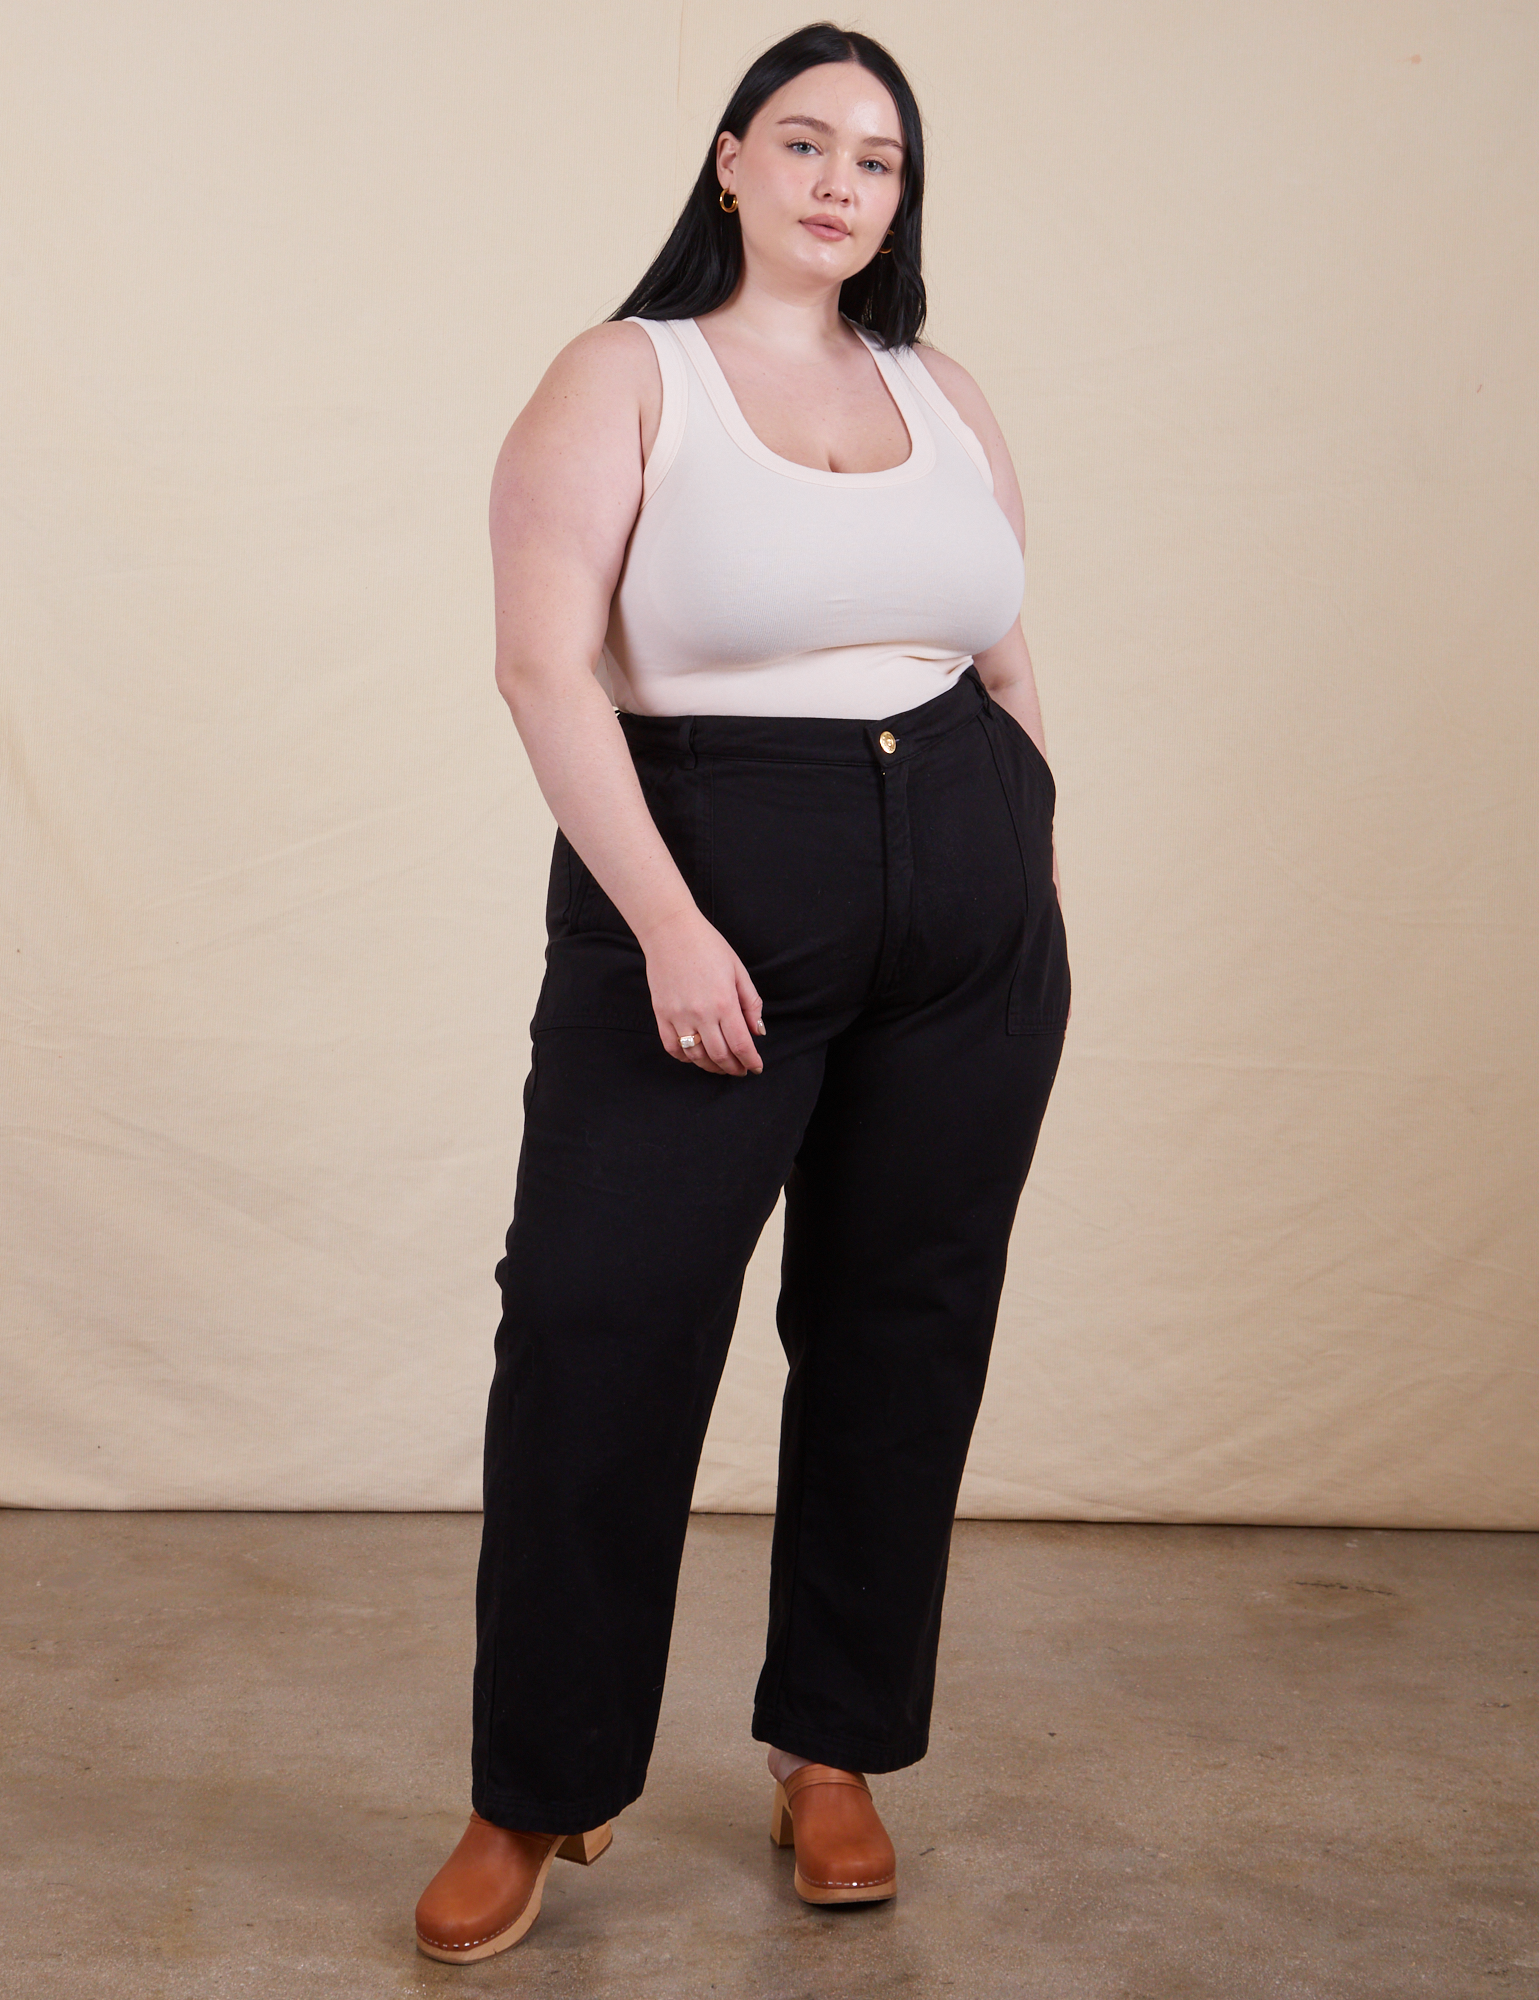 Kenna is 5'8" and wearing 1XL  Work Pants in Basic Black paired with a vintage off-white Tank Top